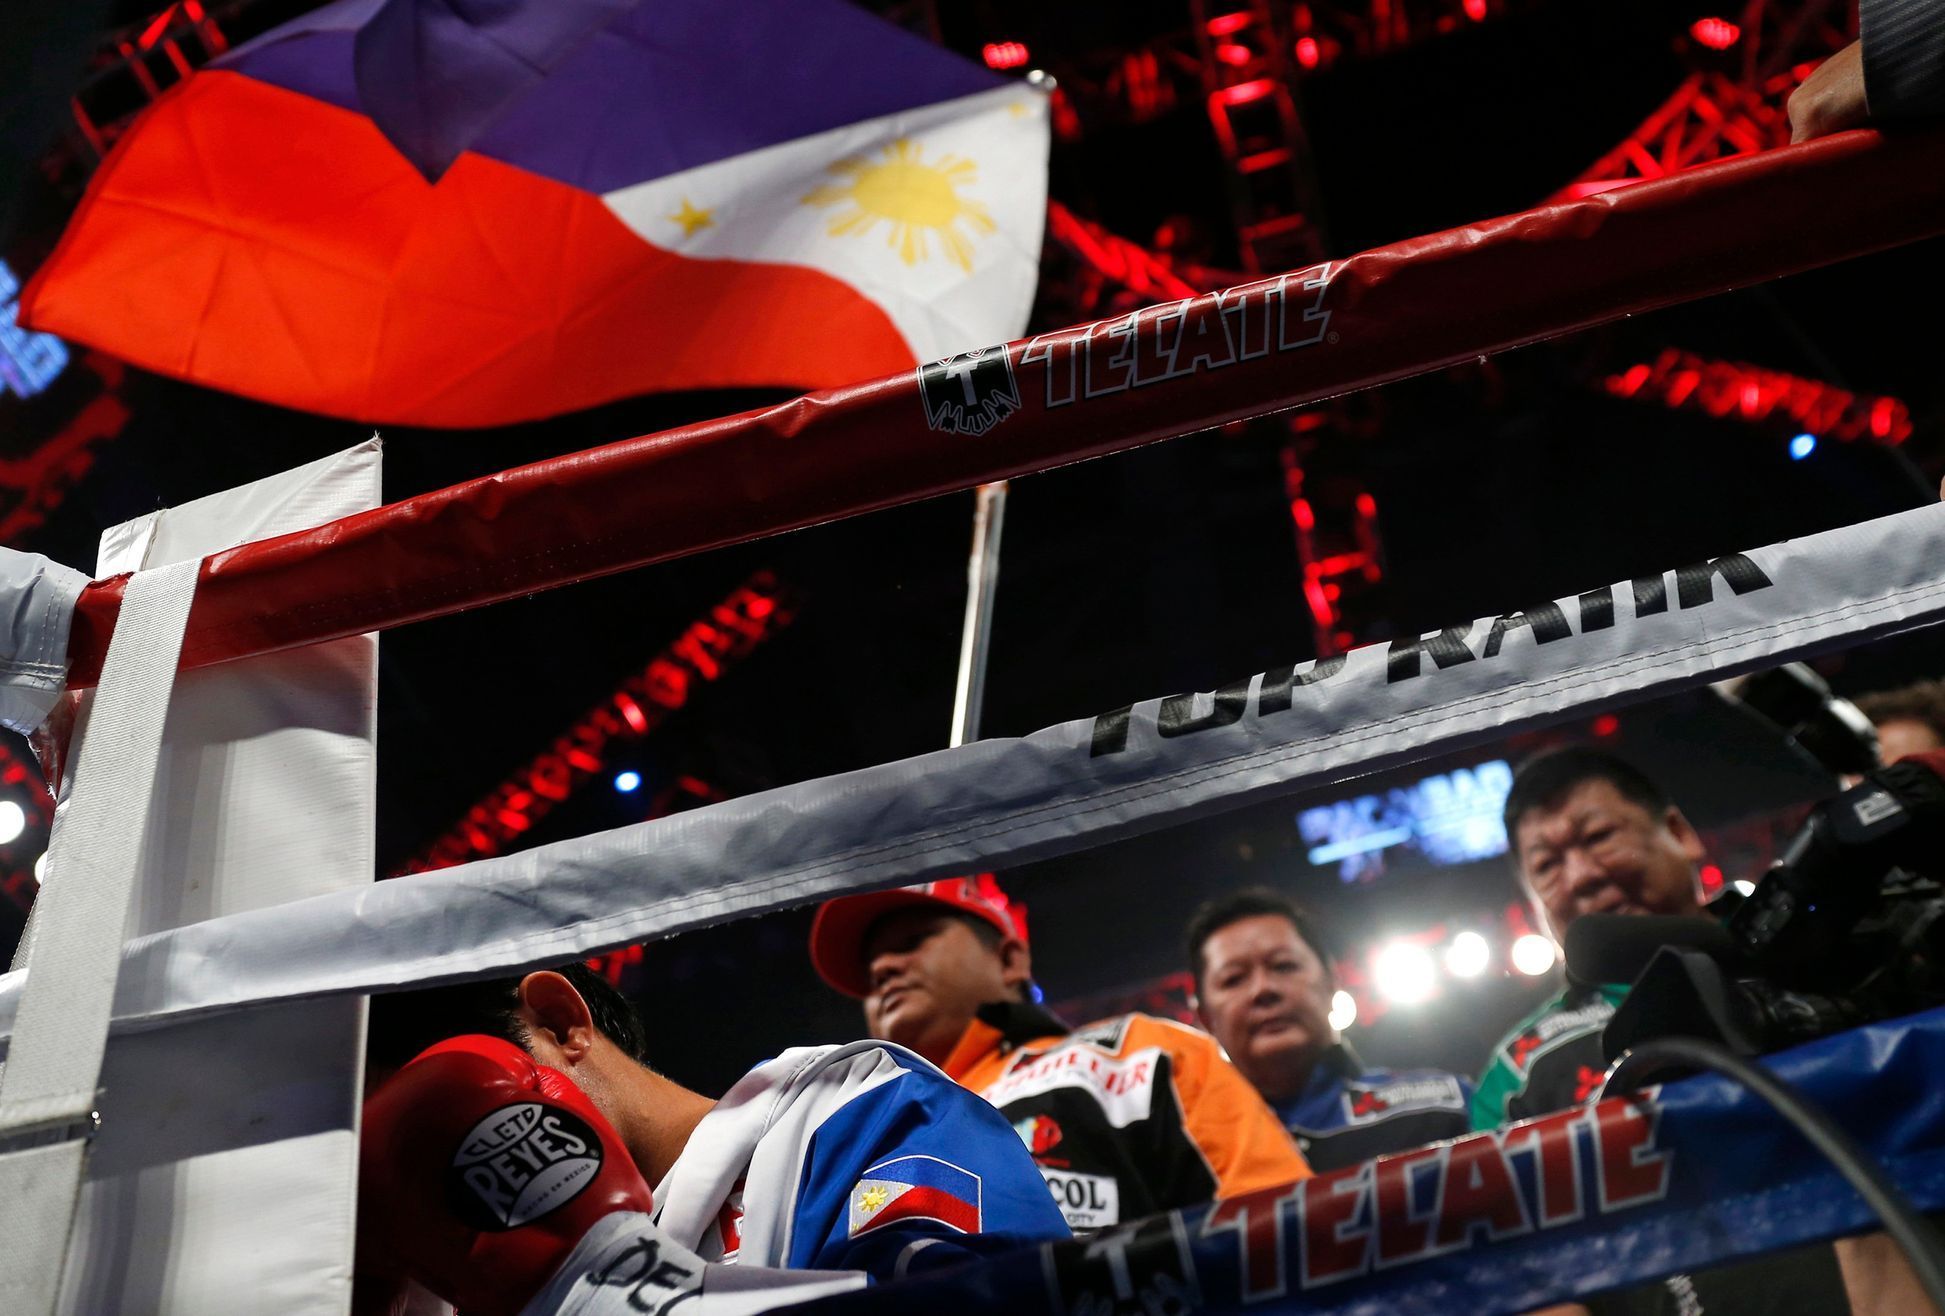 Pacquiao prays in the ring under a Philippines national flag before his WBO 12-round welterweight title fight against Algieri of the U.S. in Macau